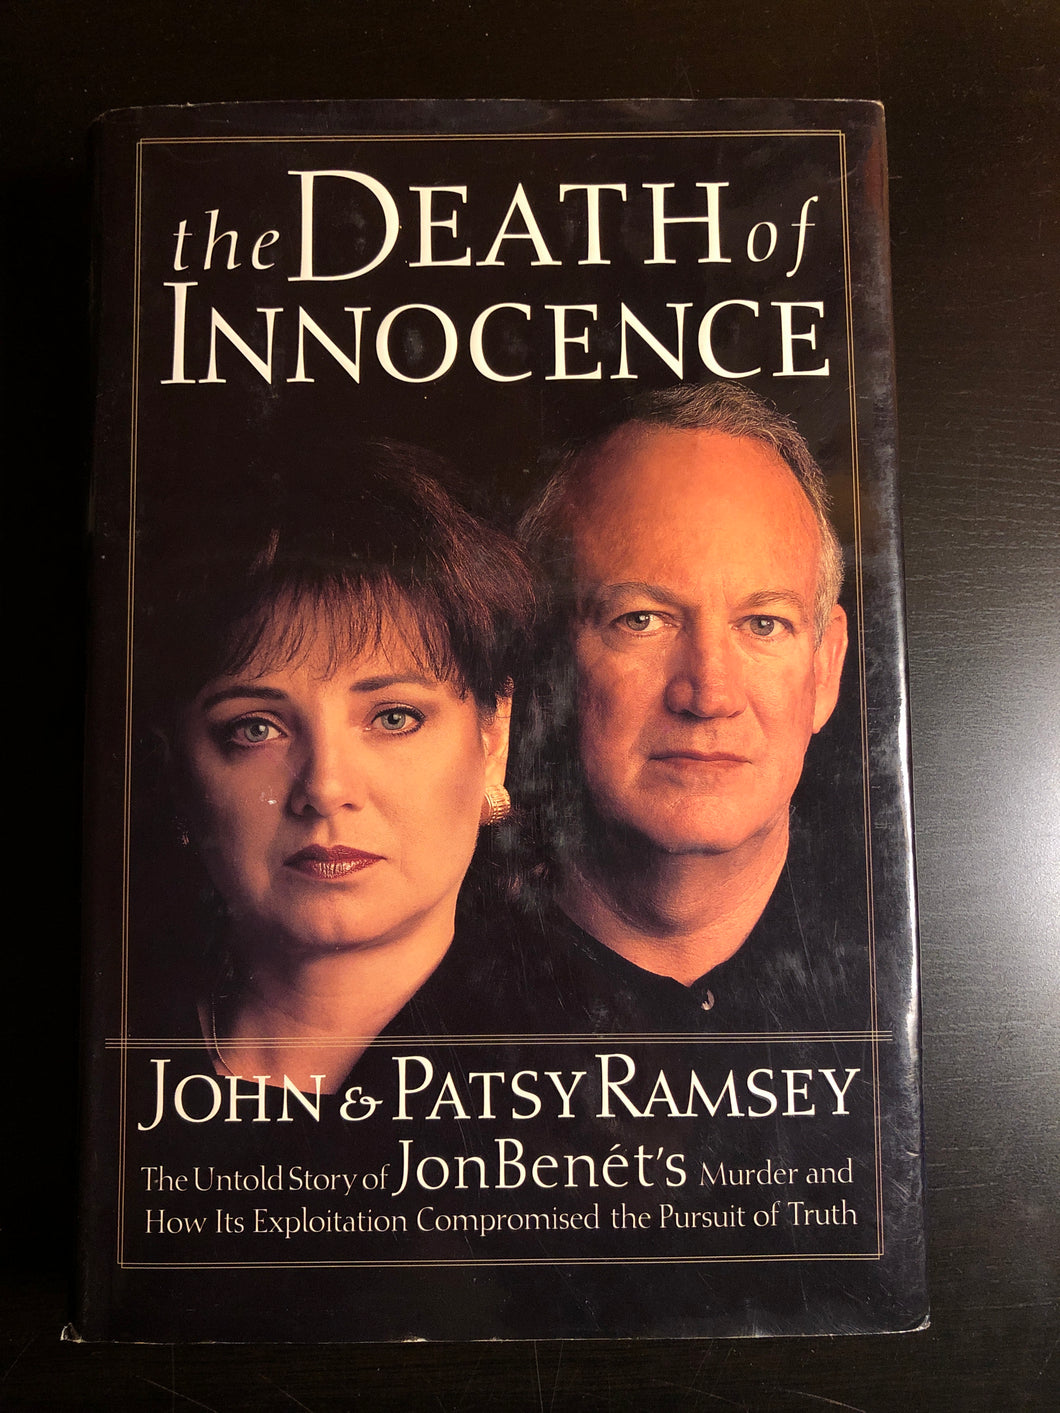 The Death of Innocence: The Untold Story of JonBenét's Murder and How Its Exploitation Compromised the Pursuit of Truth